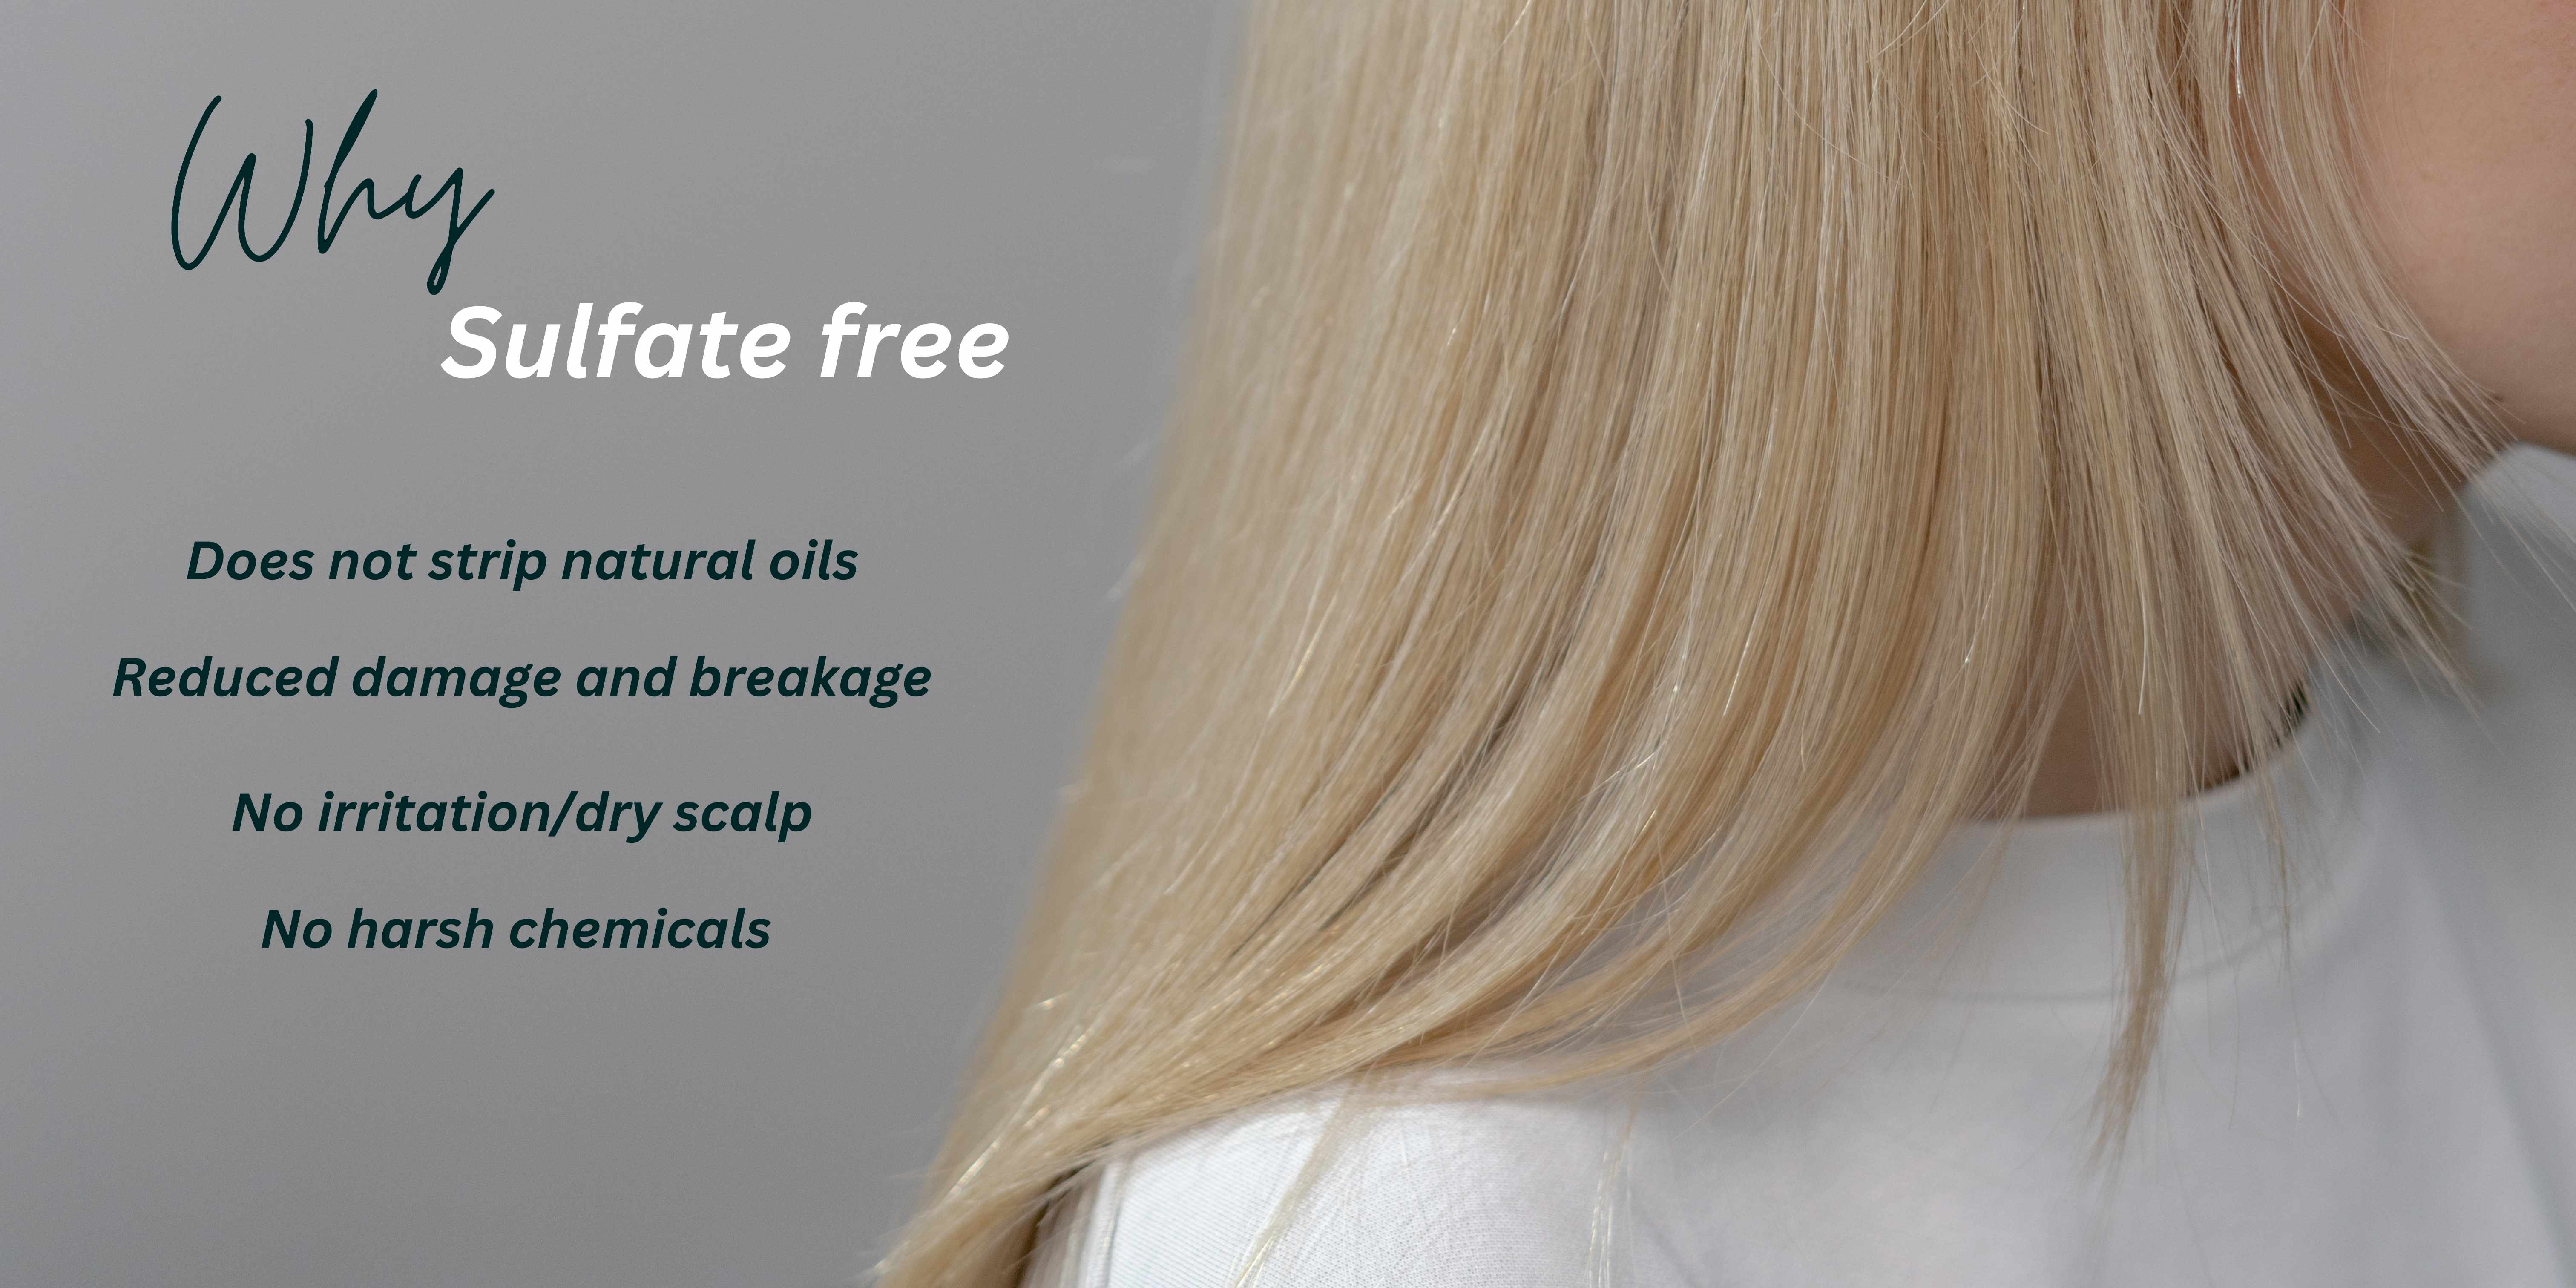 Why sulfate free shampoo is better